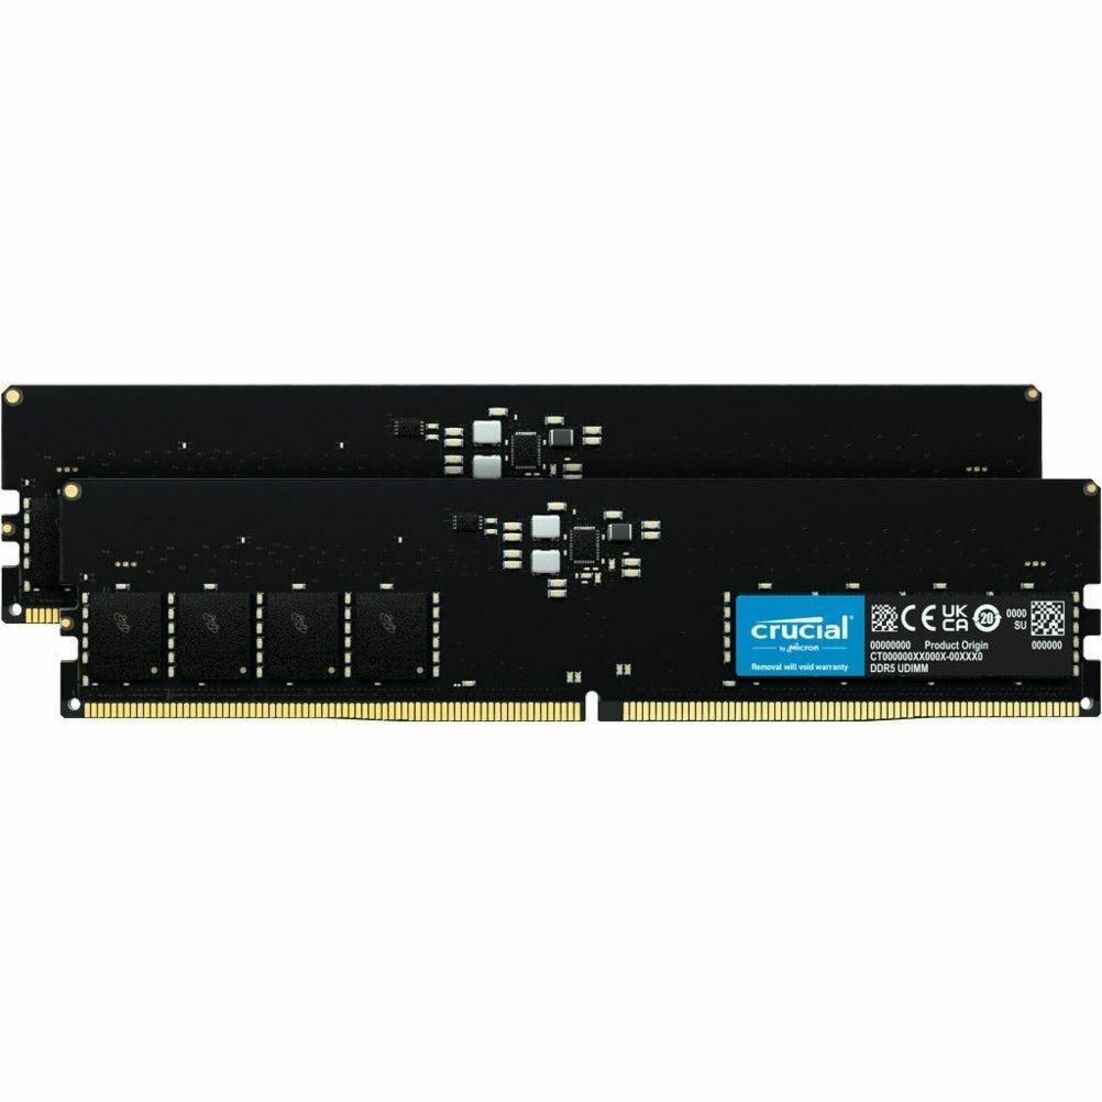 Crucial CT2K8G56C46U5 16GB (2 x 8GB) DDR5 SDRAM Memory Kit High-Speed Performance for Desktop PC and Computer